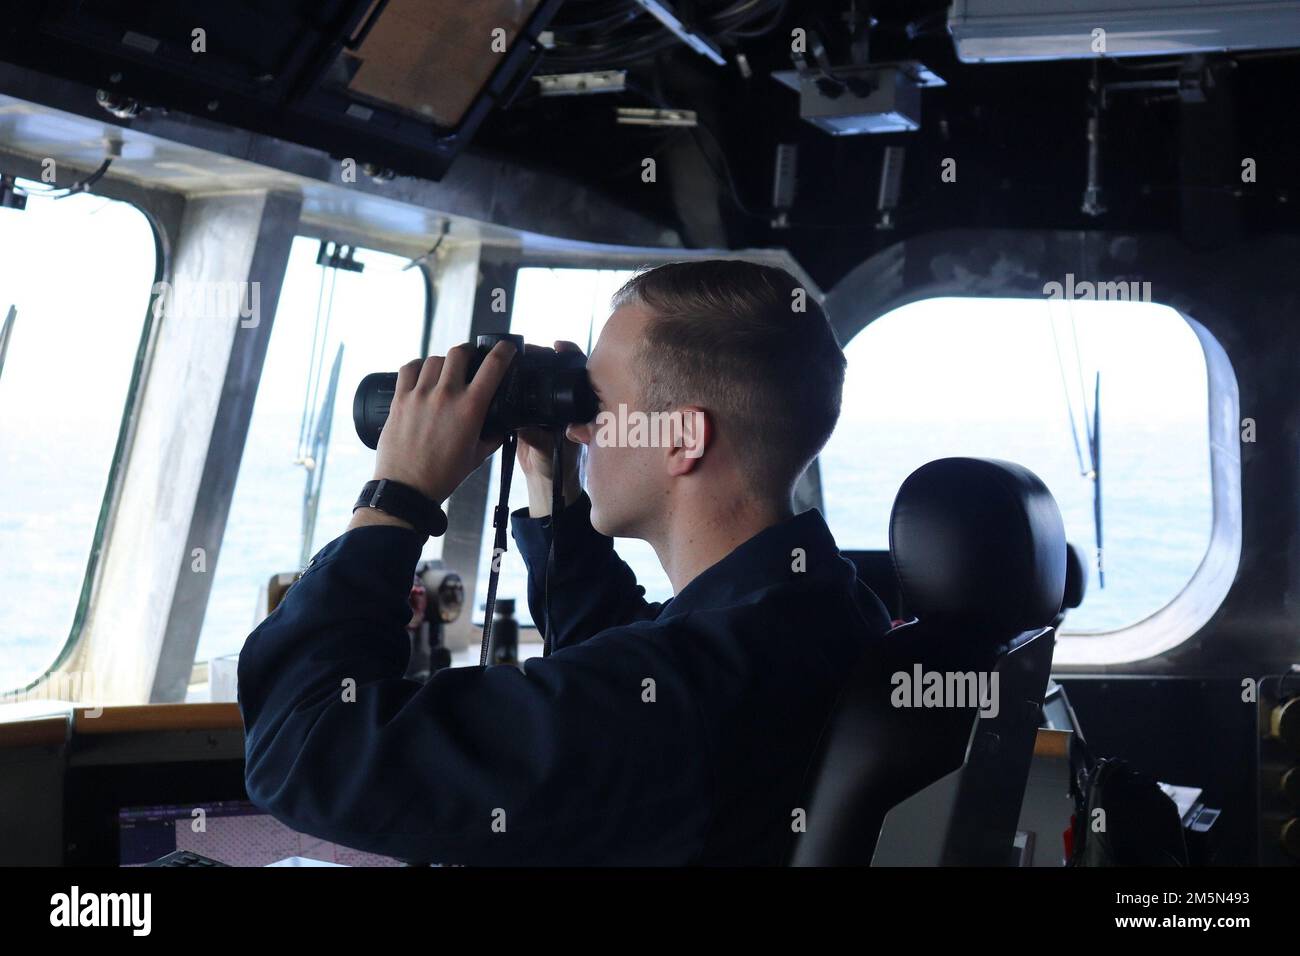 220328-O-NR876-007  PHILLIPPINE SEA (March 28, 2022) – Lt. j.g. Joshua Kraus, from Woodbridge, Virginia, stands watch as the Officer of the Deck aboard the Independence-variant littoral combat ship USS Charleston (LCS 18) during a division tactic (DIVTAC) exercise with the French Navy Floréal-class frigate FS Vendémiaire (F734). Charleston, part of Destroyer Squadron (DESRON) 7, is on a rotational deployment, operating in the U.S. 7th Fleet area of operations to enhance interoperability with partners and serve as a ready-response force in support of a free and open Indo-Pacific region. Stock Photo